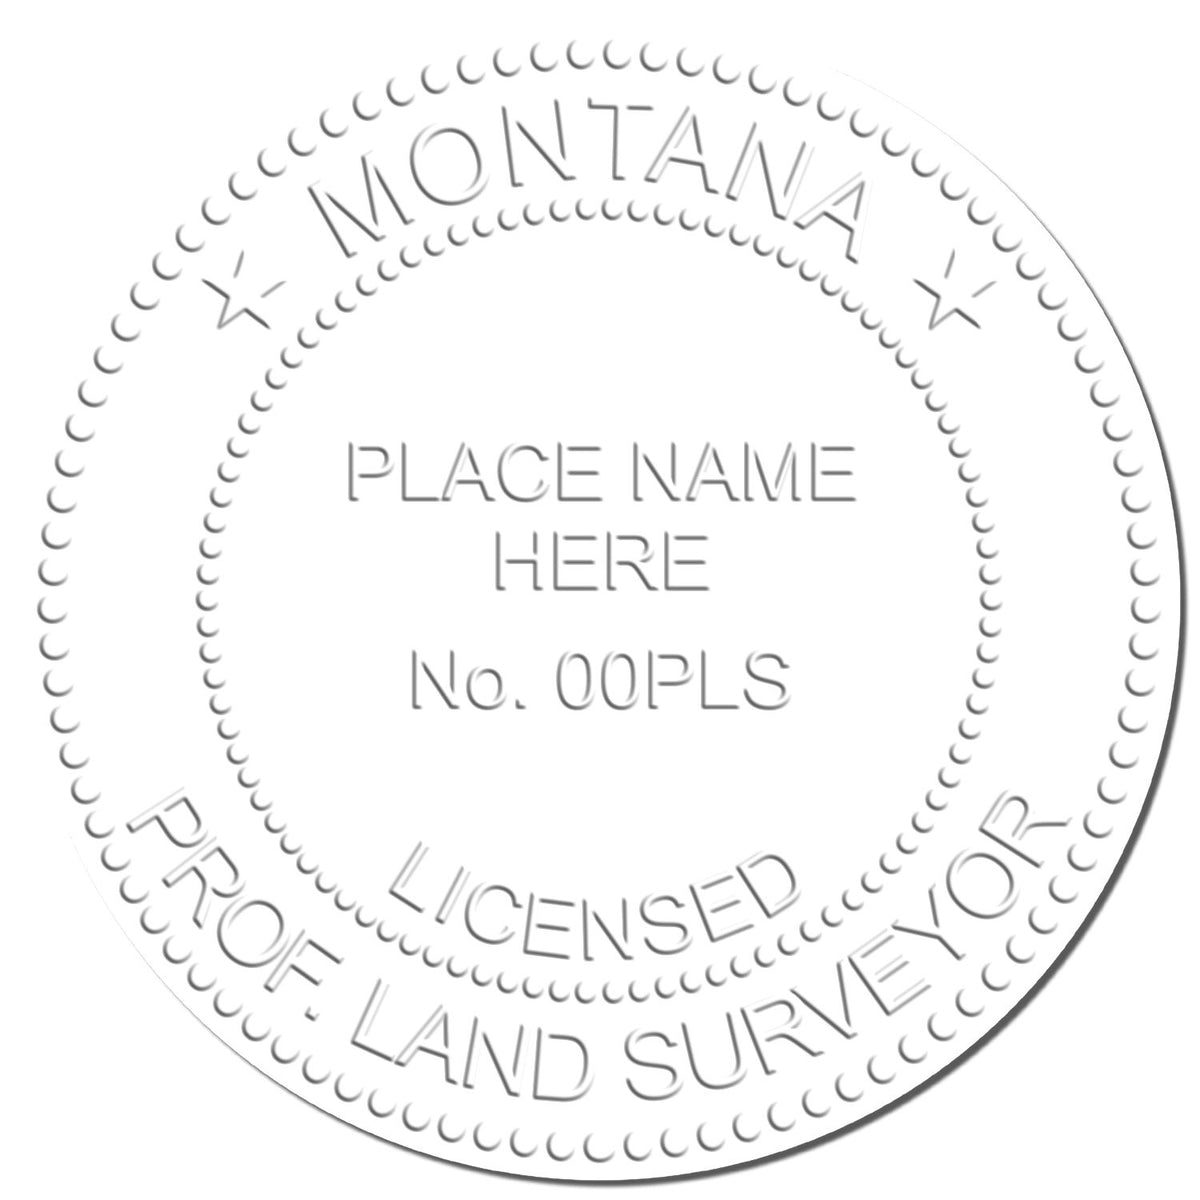 This paper is stamped with a sample imprint of the Hybrid Montana Land Surveyor Seal, signifying its quality and reliability.